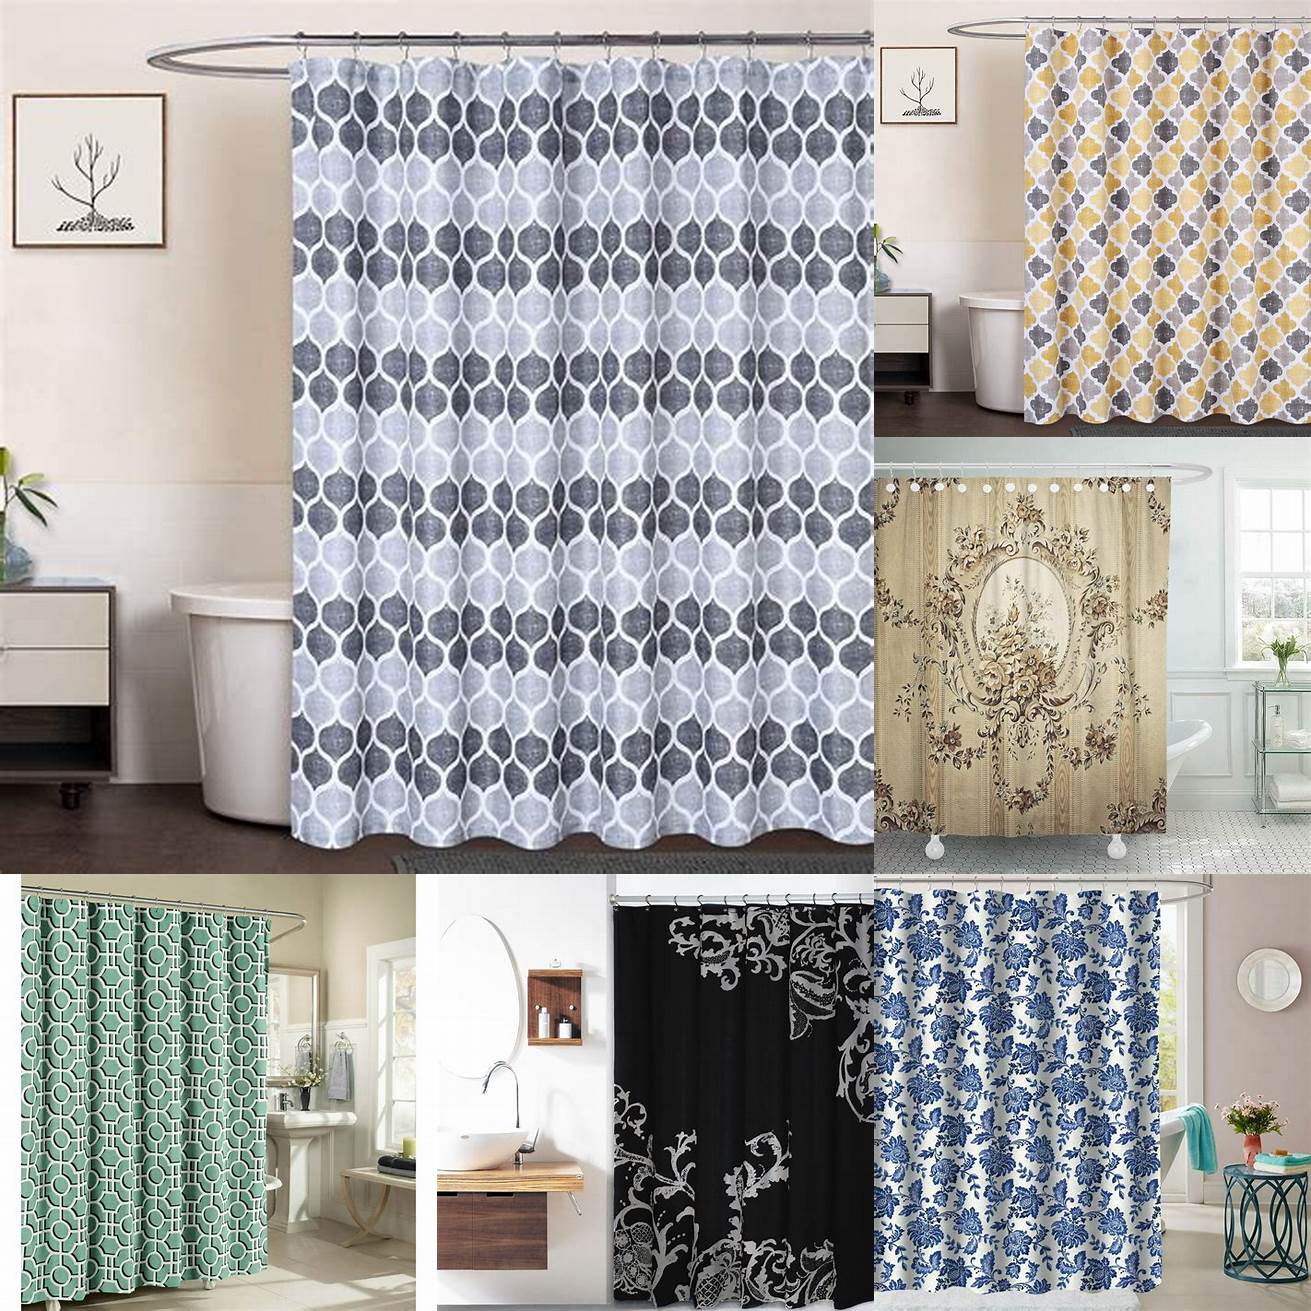 Patterned fabric shower curtain